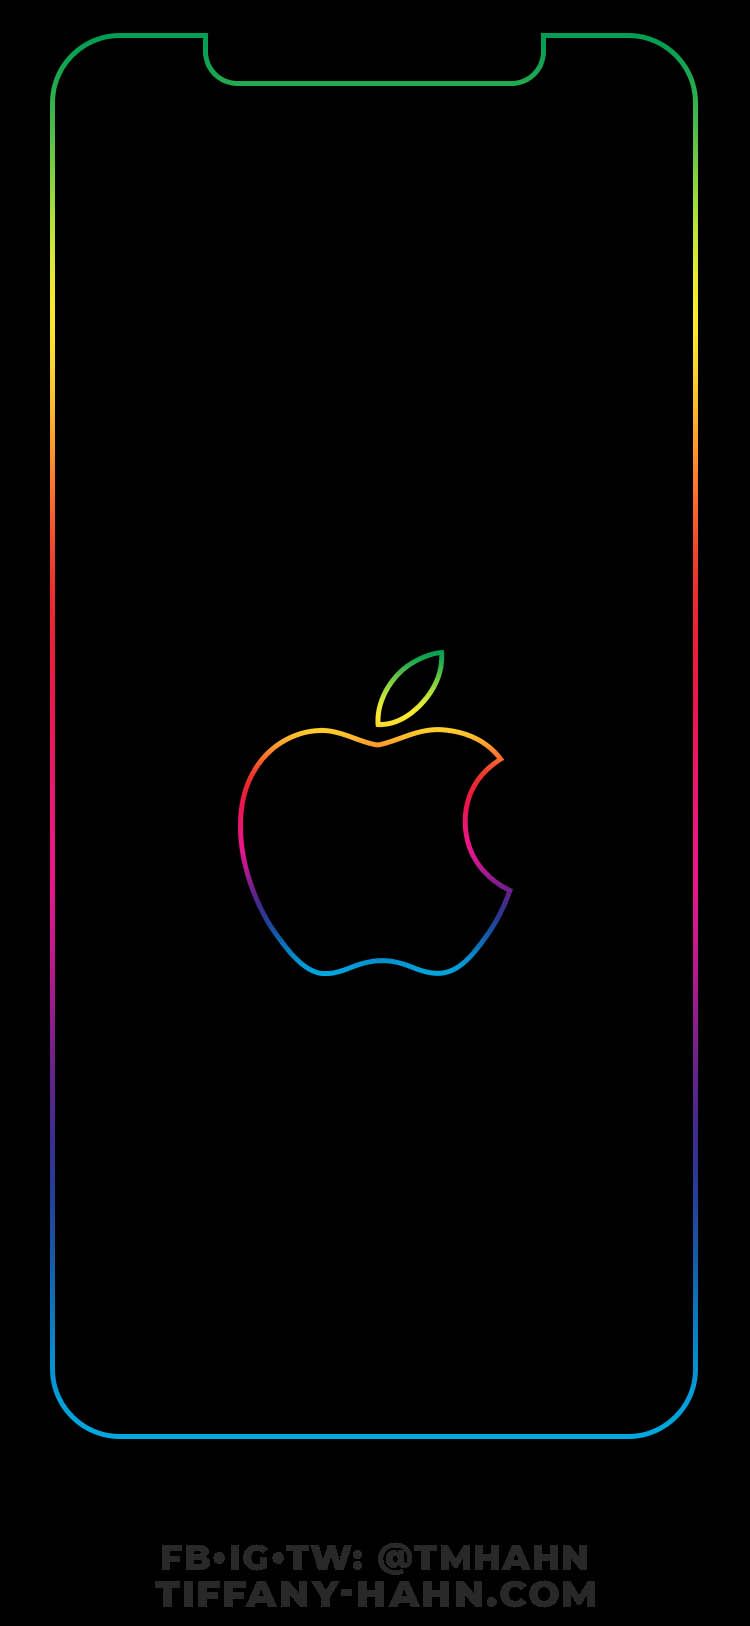 This wallpaper will perfectly fit the iPhone XS Max in ZOOMED mode